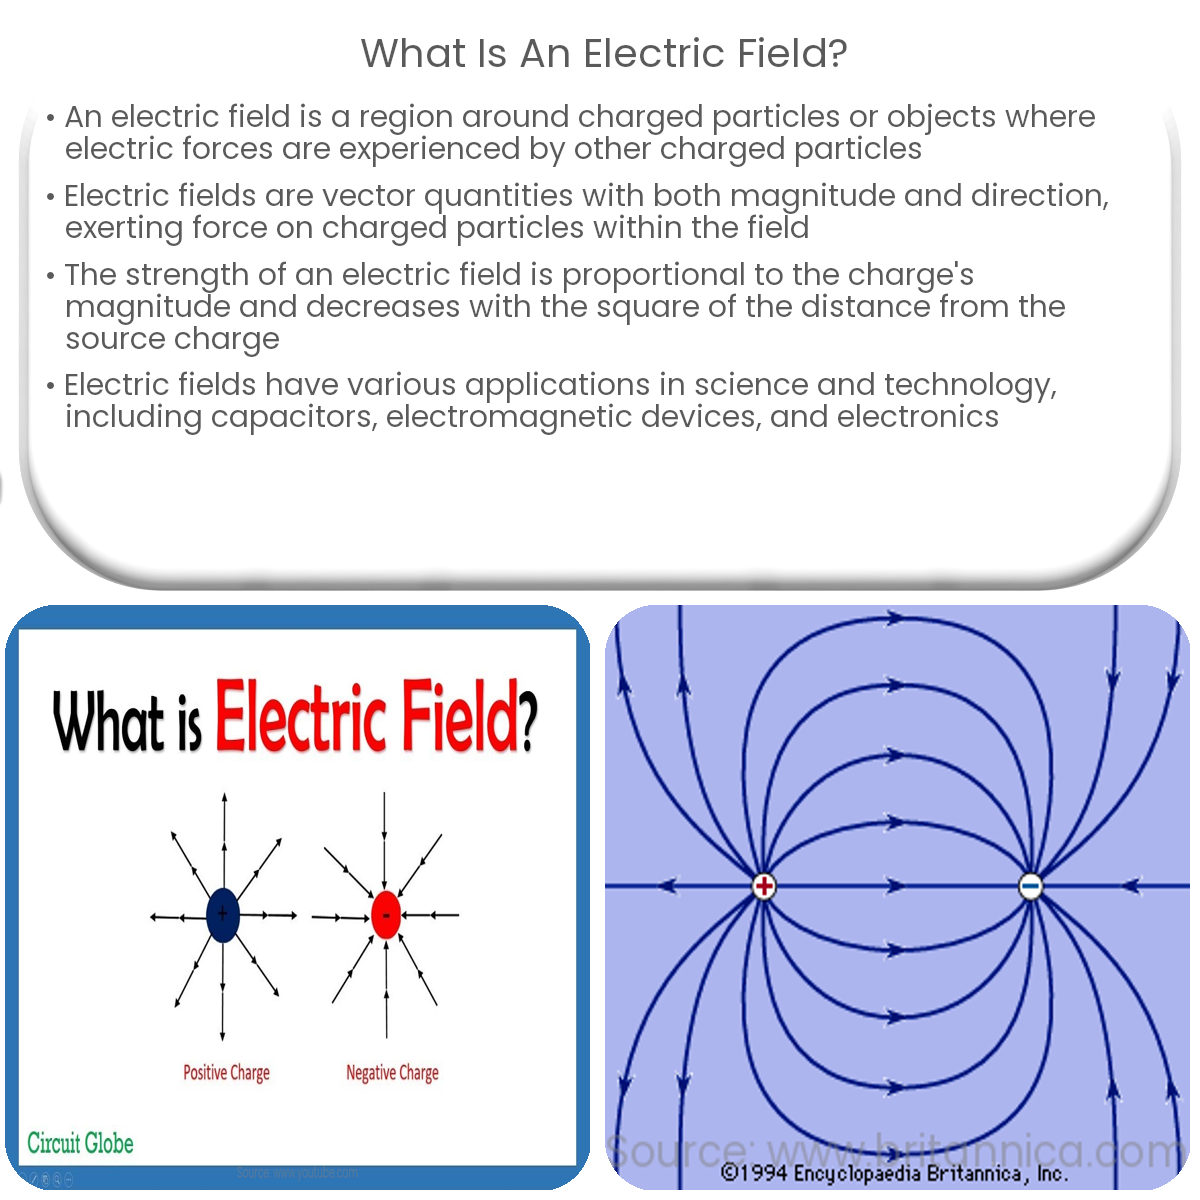 What is an electric field?